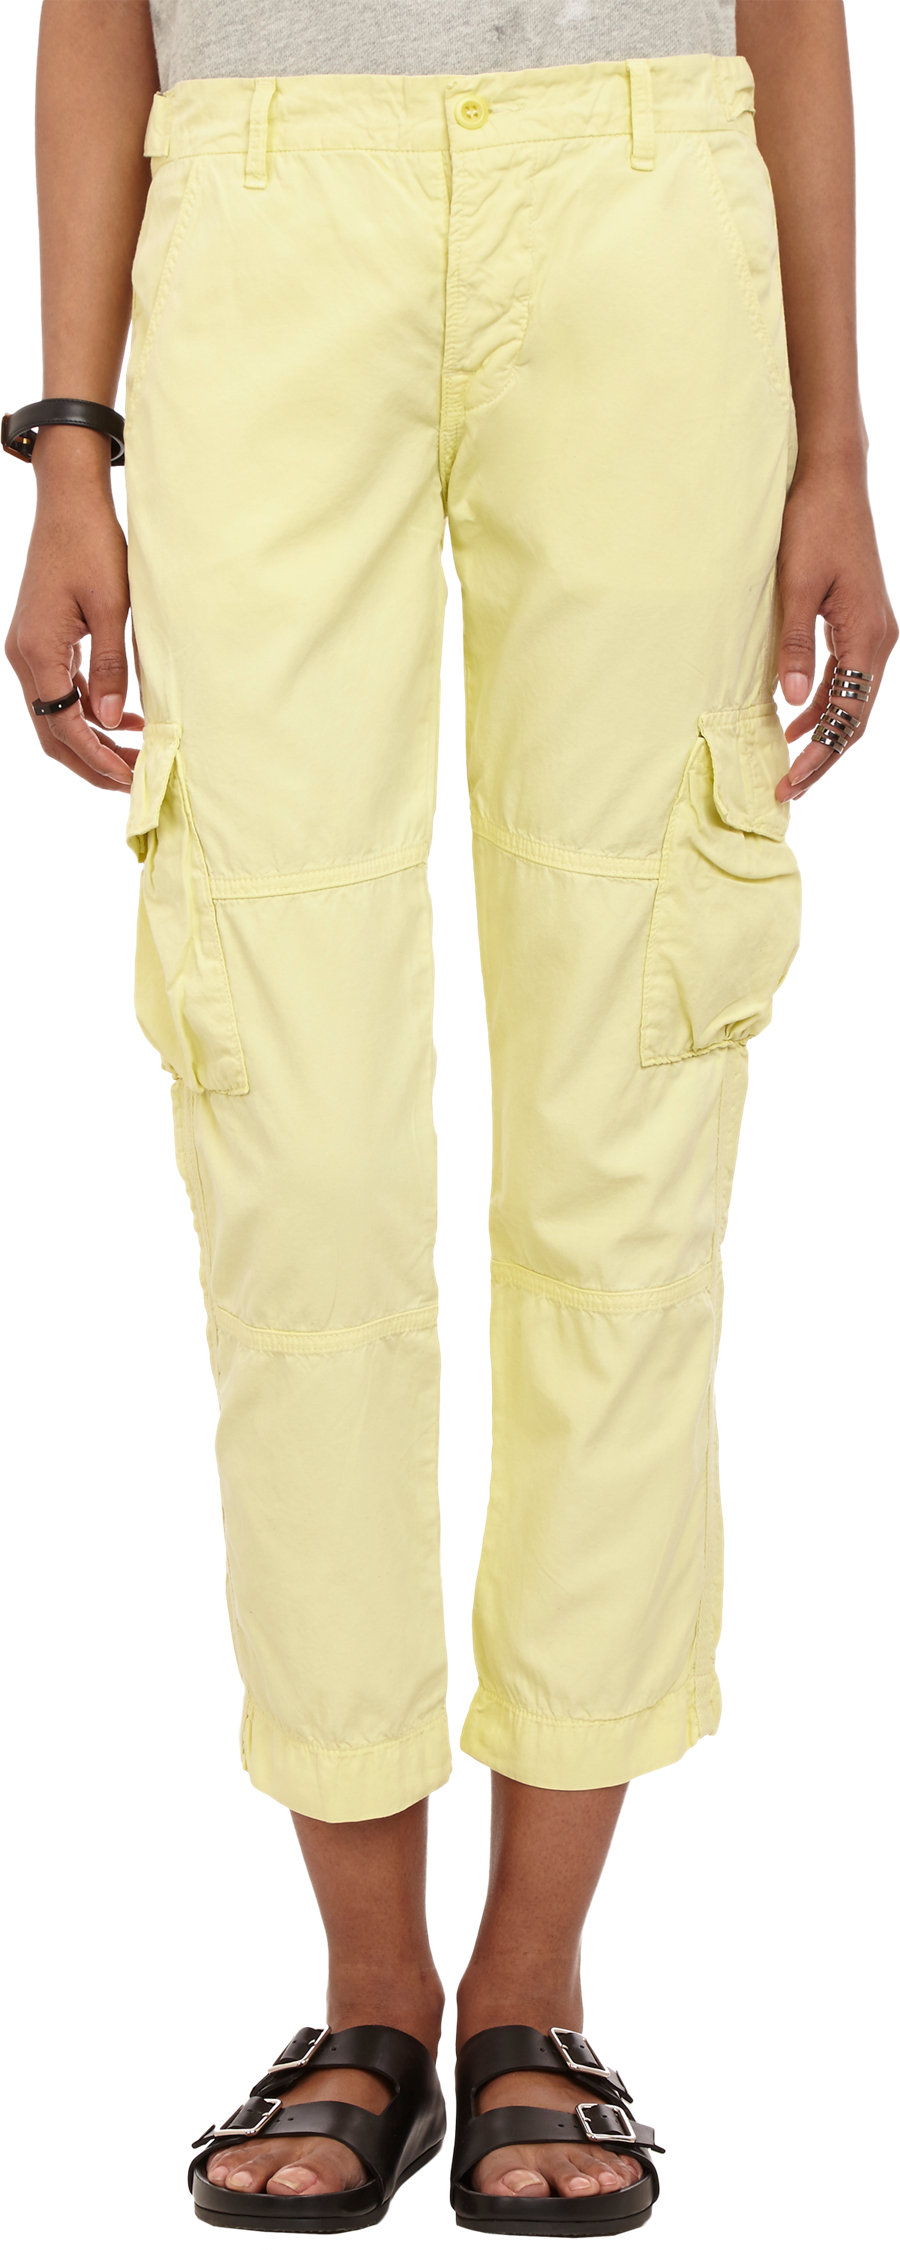 Nsf Clothing Basquiat Cargo Pants in Yellow | Lyst